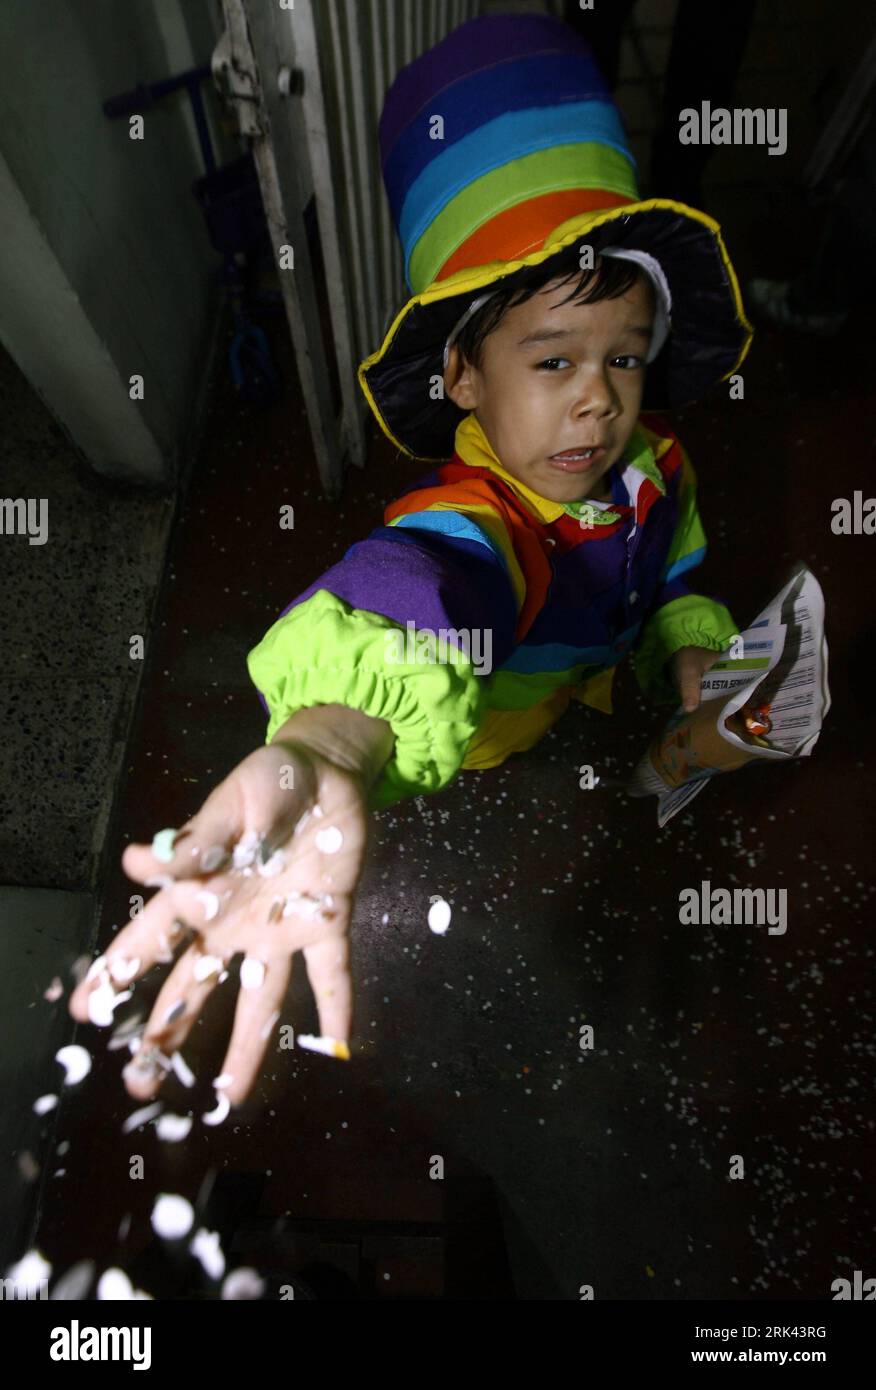 Bildnummer: 53584955  Datum: 30.10.2009  Copyright: imago/Xinhua (091107) -- BARQUISIMETO, Nov. 7, 2009 (Xinhua) -- Jose Manuel Sanchez Aguero, a five-year-old boy, performs magic at home in Barquisimeto, Venezuela, Oct. 30, 2009. Jose s father Miguel Angel Sanchez is a technician and a part-time host for children s parties, which sets a good example to his son. Although quiet and shy in class, Jose now has learnt to perform magic and dancing in children s parties. Michael Jackson is Jose s favorite idol and he is quite up on imitating the pop star. I ll be as famous as Michael sooner or later Stock Photo